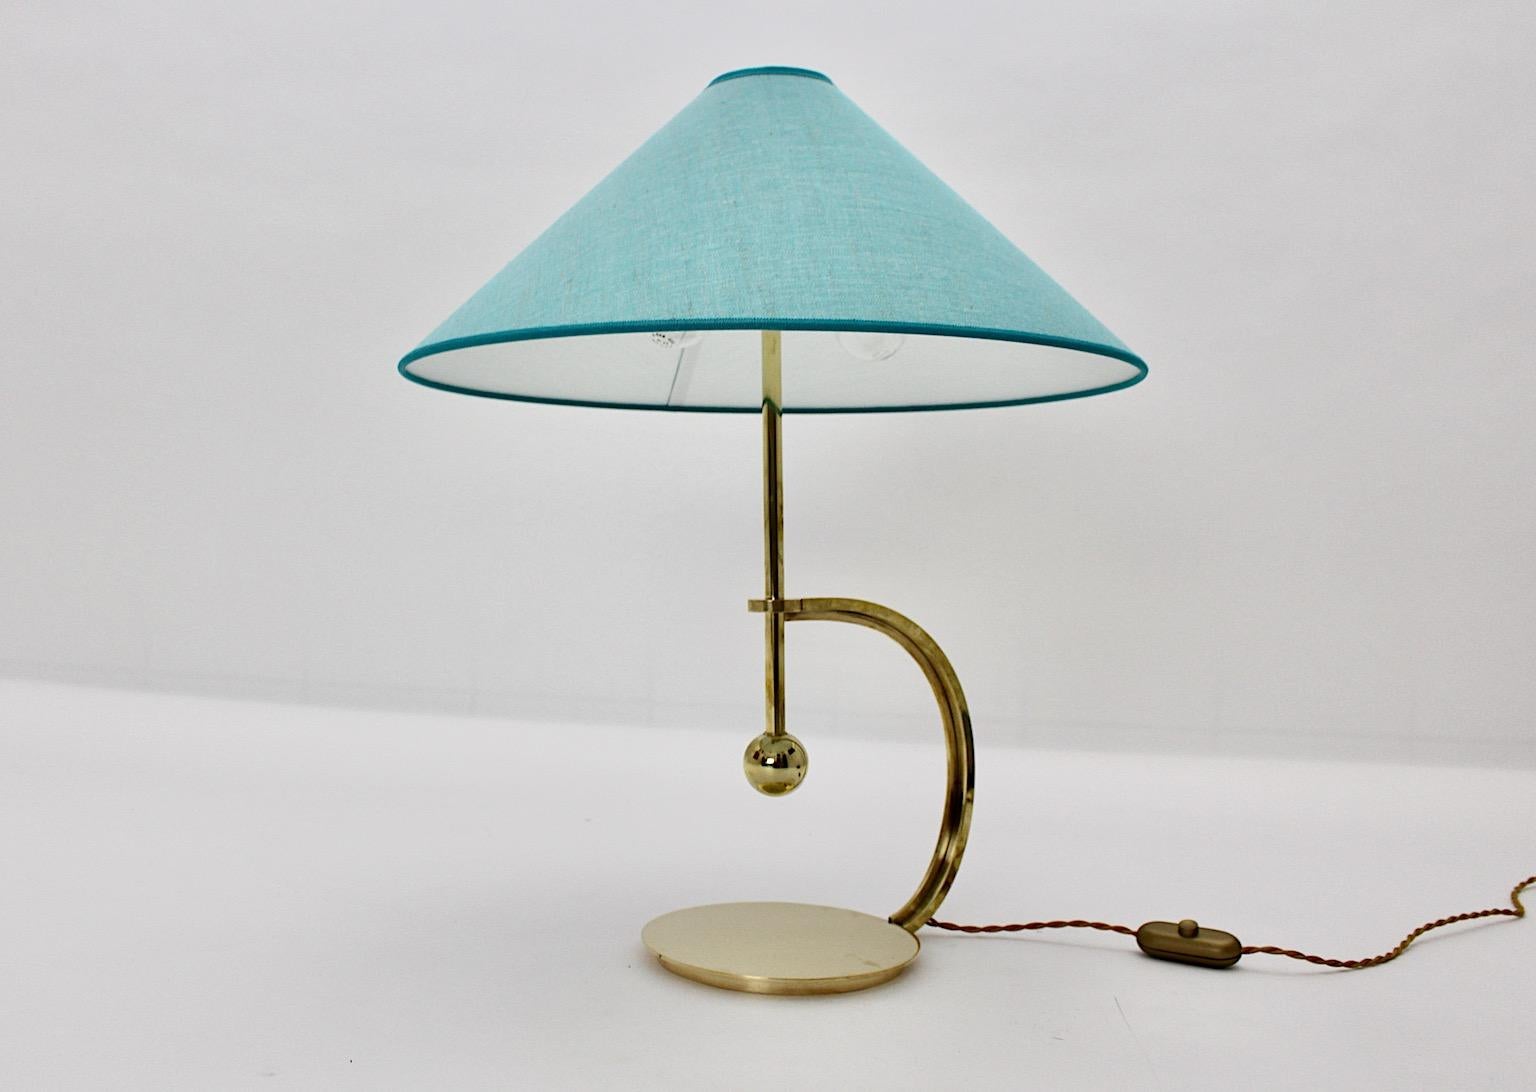 Art Deco Brass Vintage Table Lamp Blue Teal Textile Shade Vienna C 1925 For Sale 5